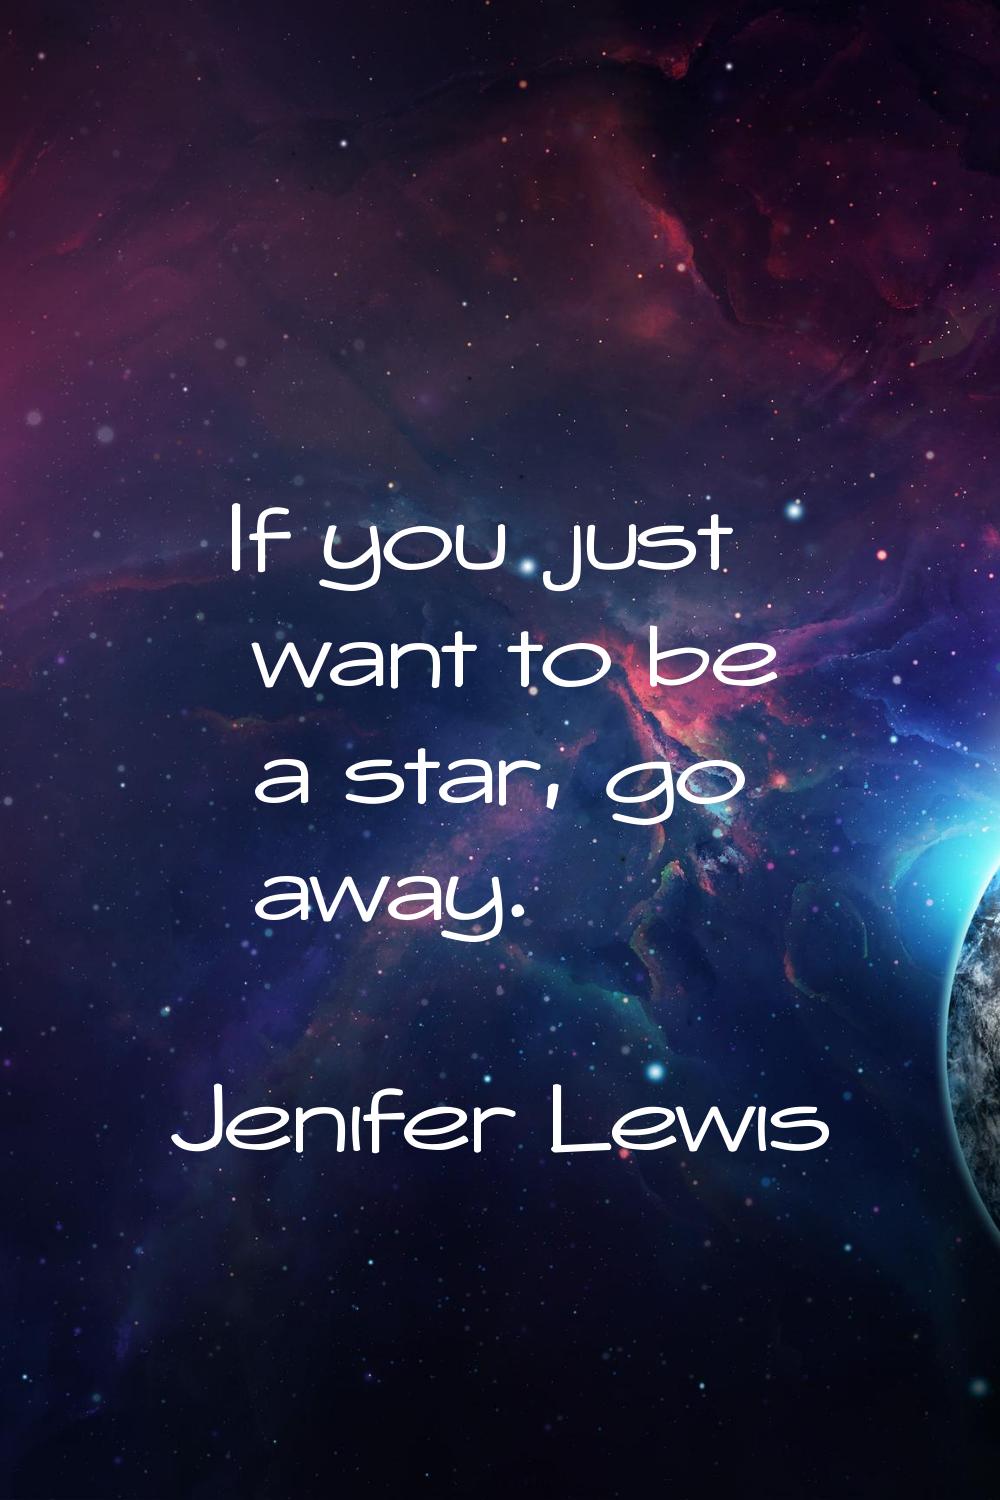 If you just want to be a star, go away.